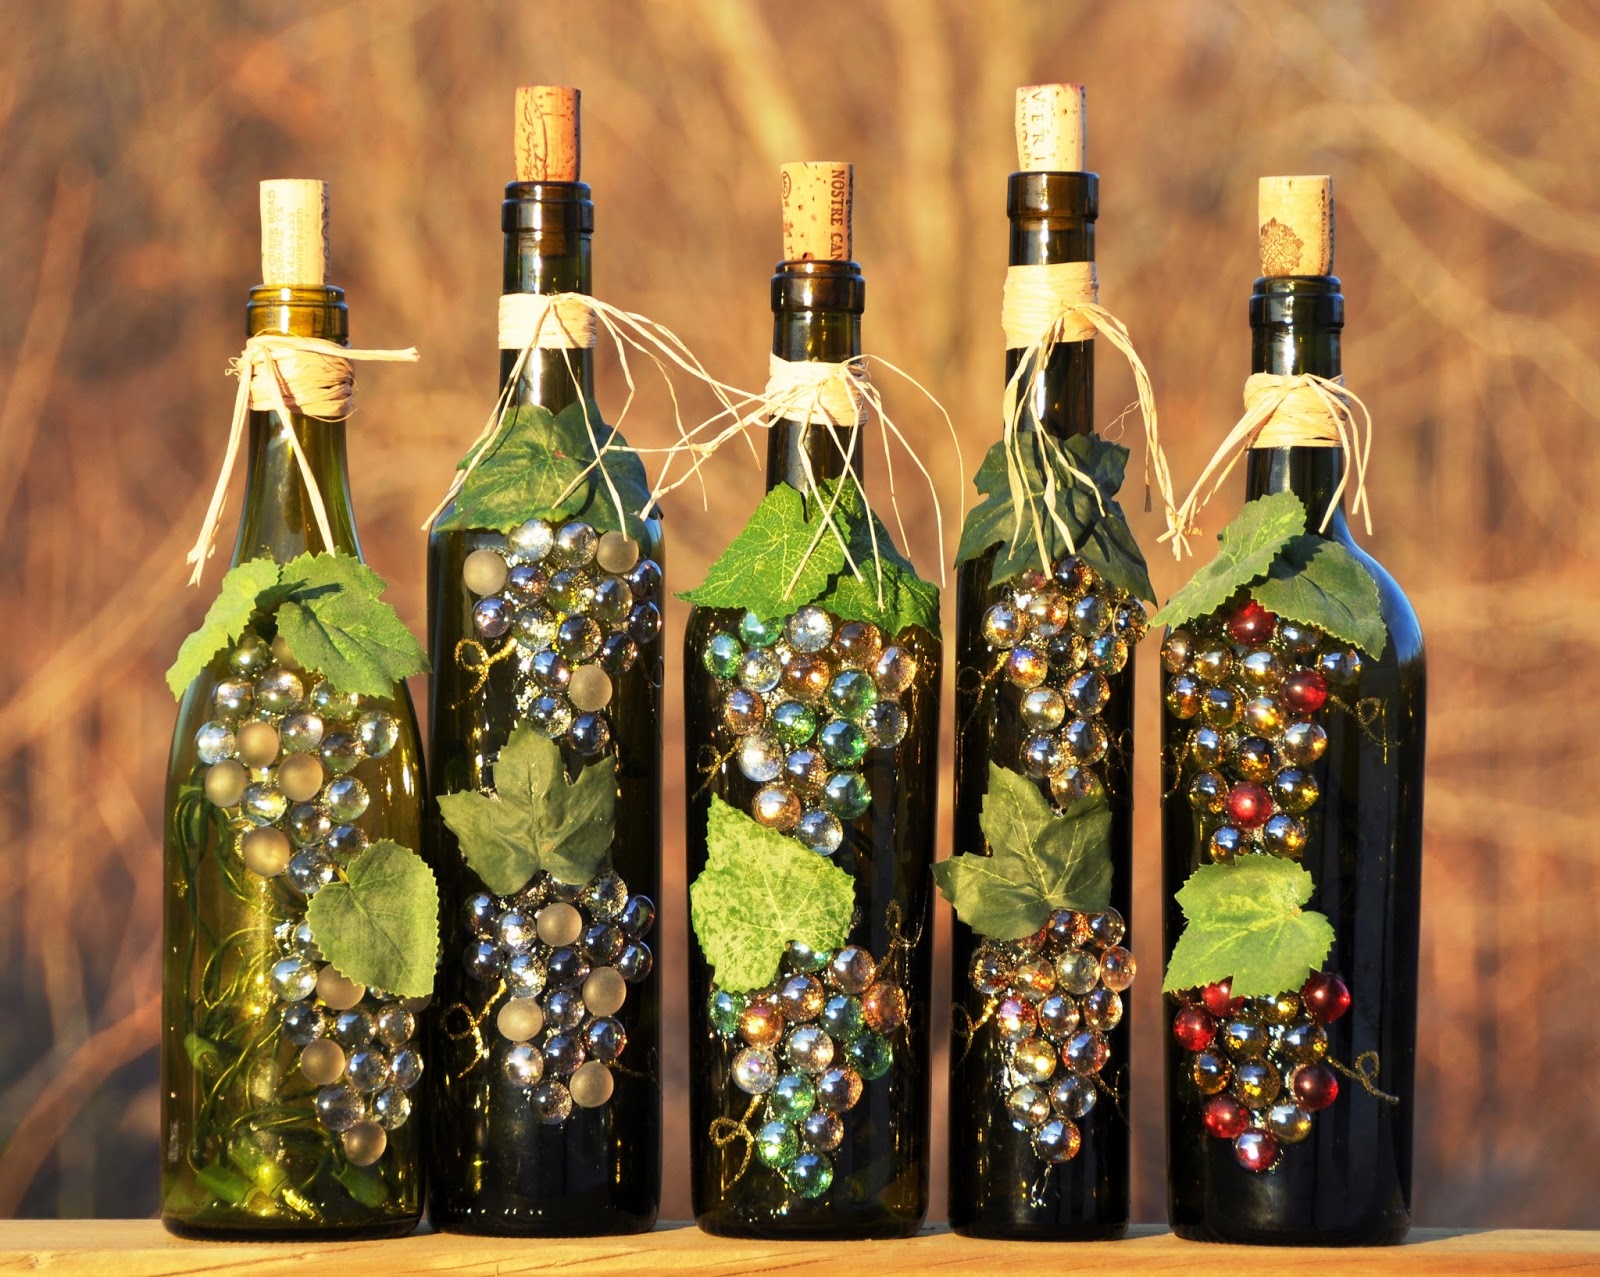 wine bottle recycle craft project ~ crafts and arts ideas